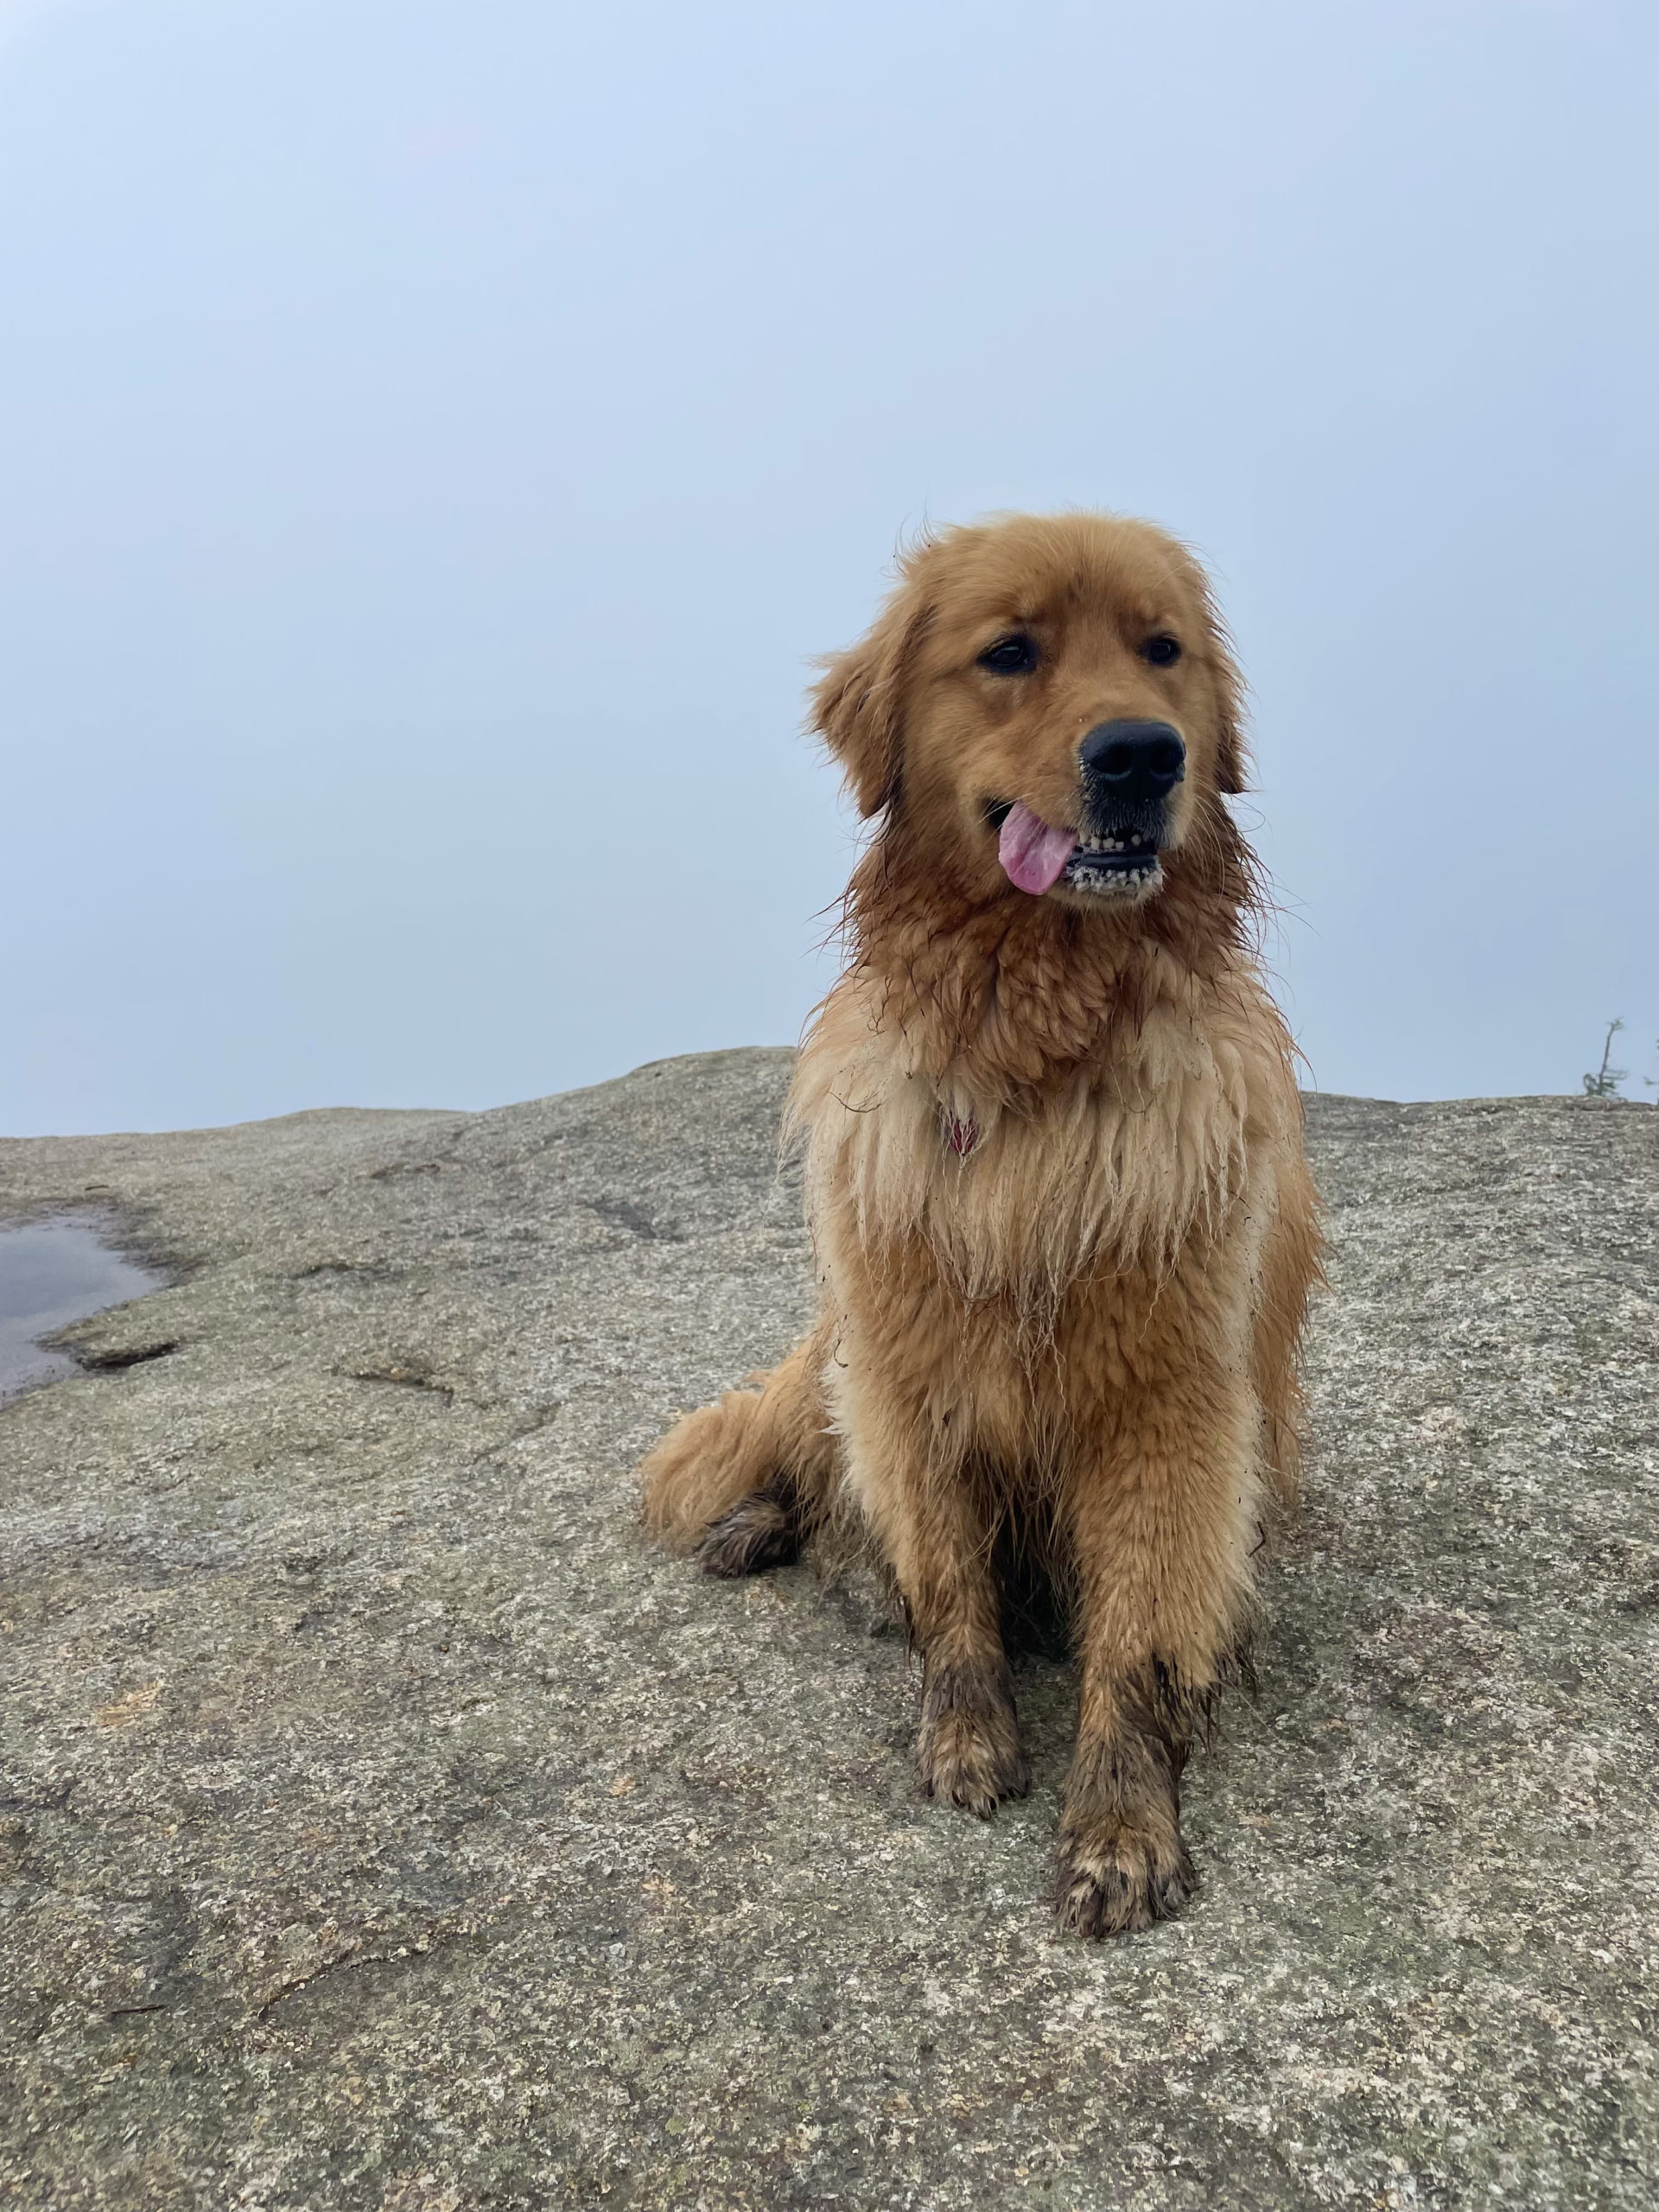 Luna the Golden Retriever, hiking Mt. Osceola in the White Mountain National Forest, New Hampshire